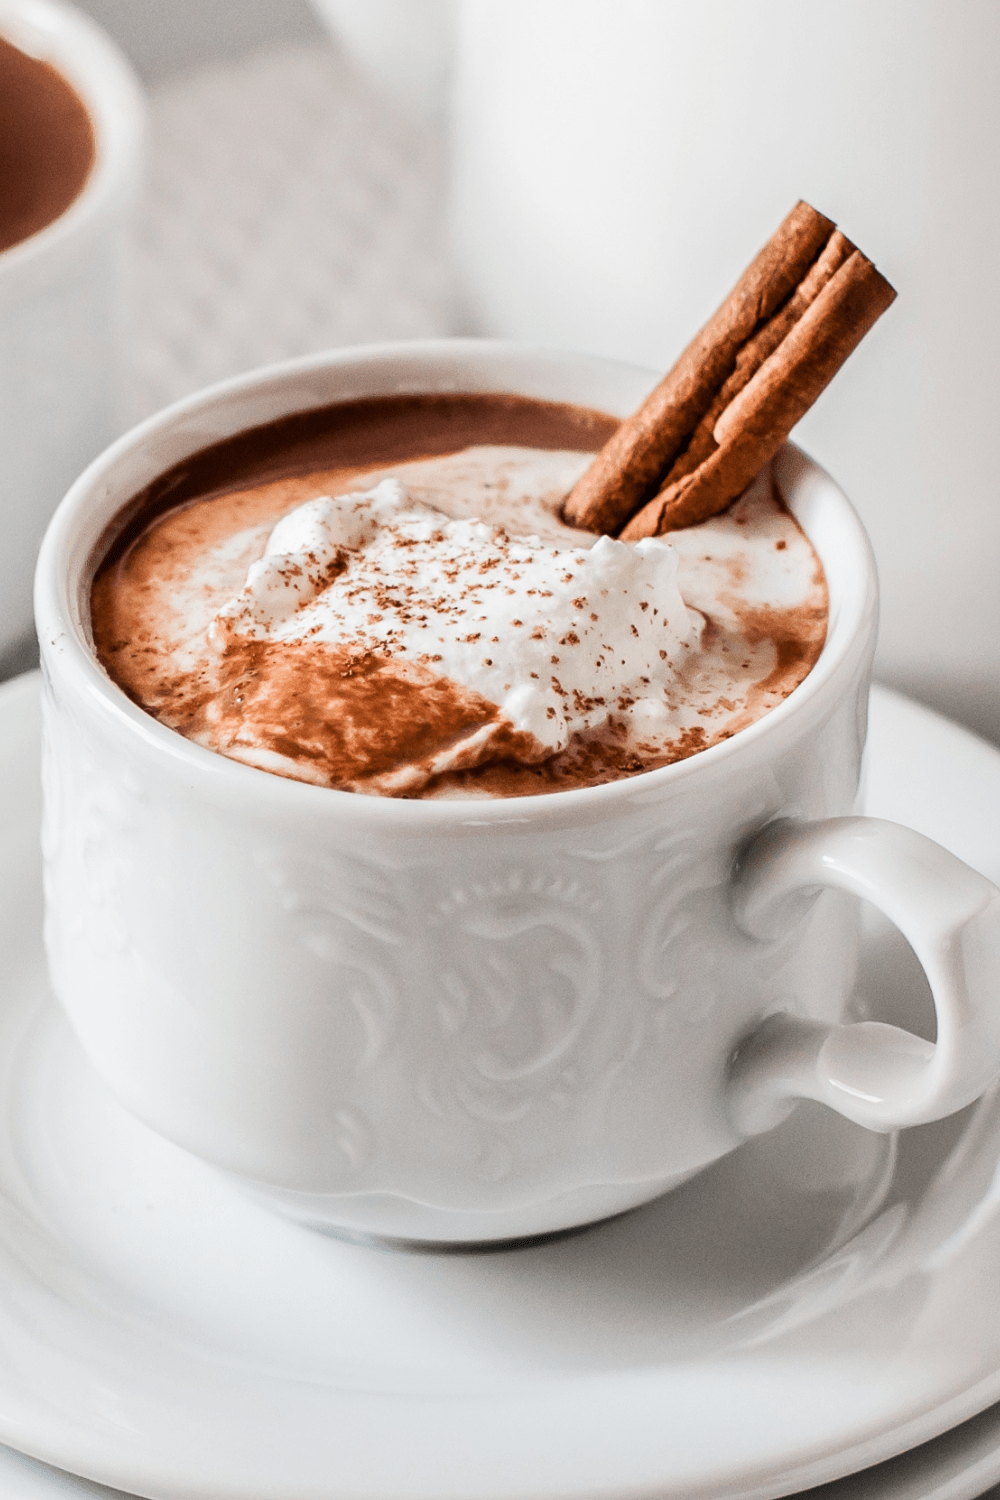 Hot chocolate in a white mug topped with cream and cinnamon sticks.